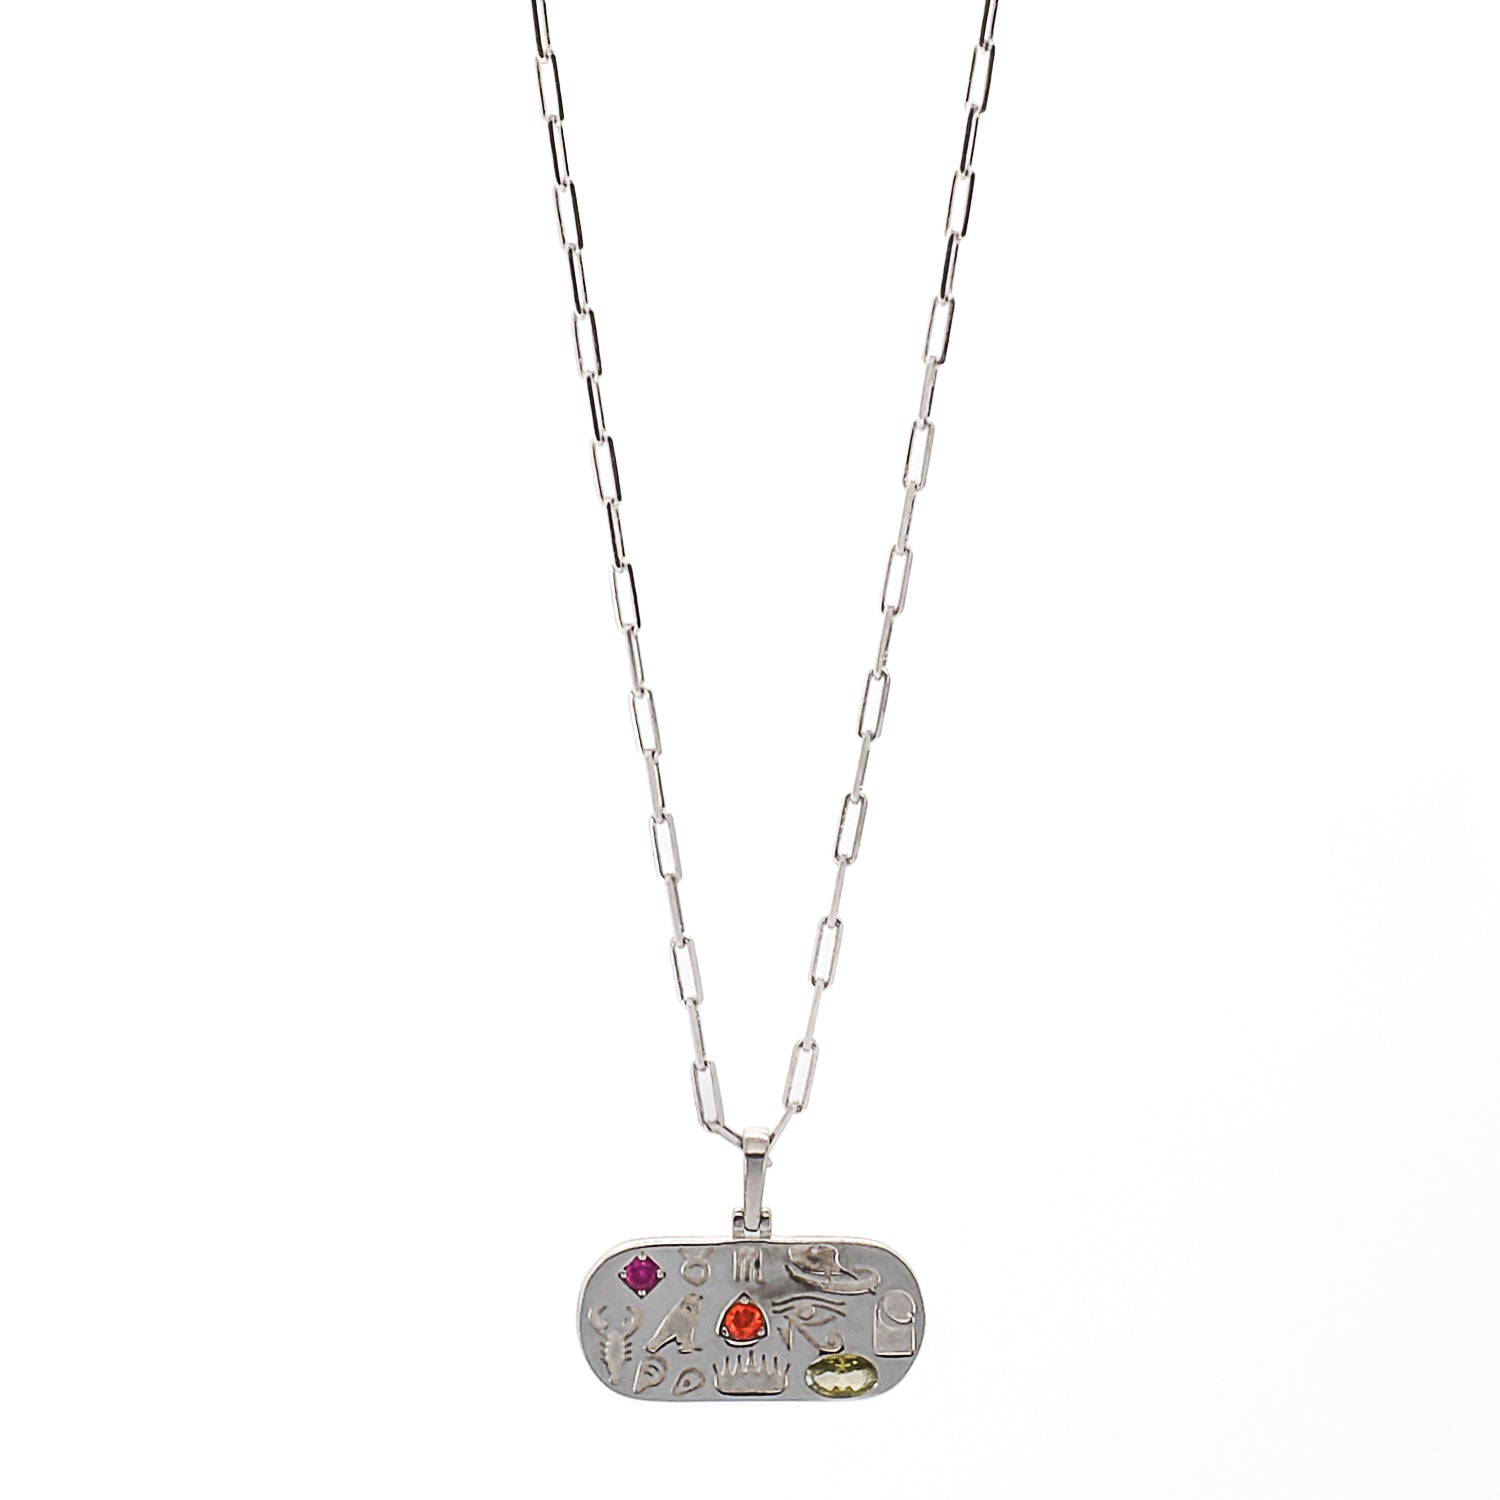 Egyptian Symbols Silver Necklace with Intricate Sterling Silver Pendant, a stunning representation of ancient Egyptian culture.